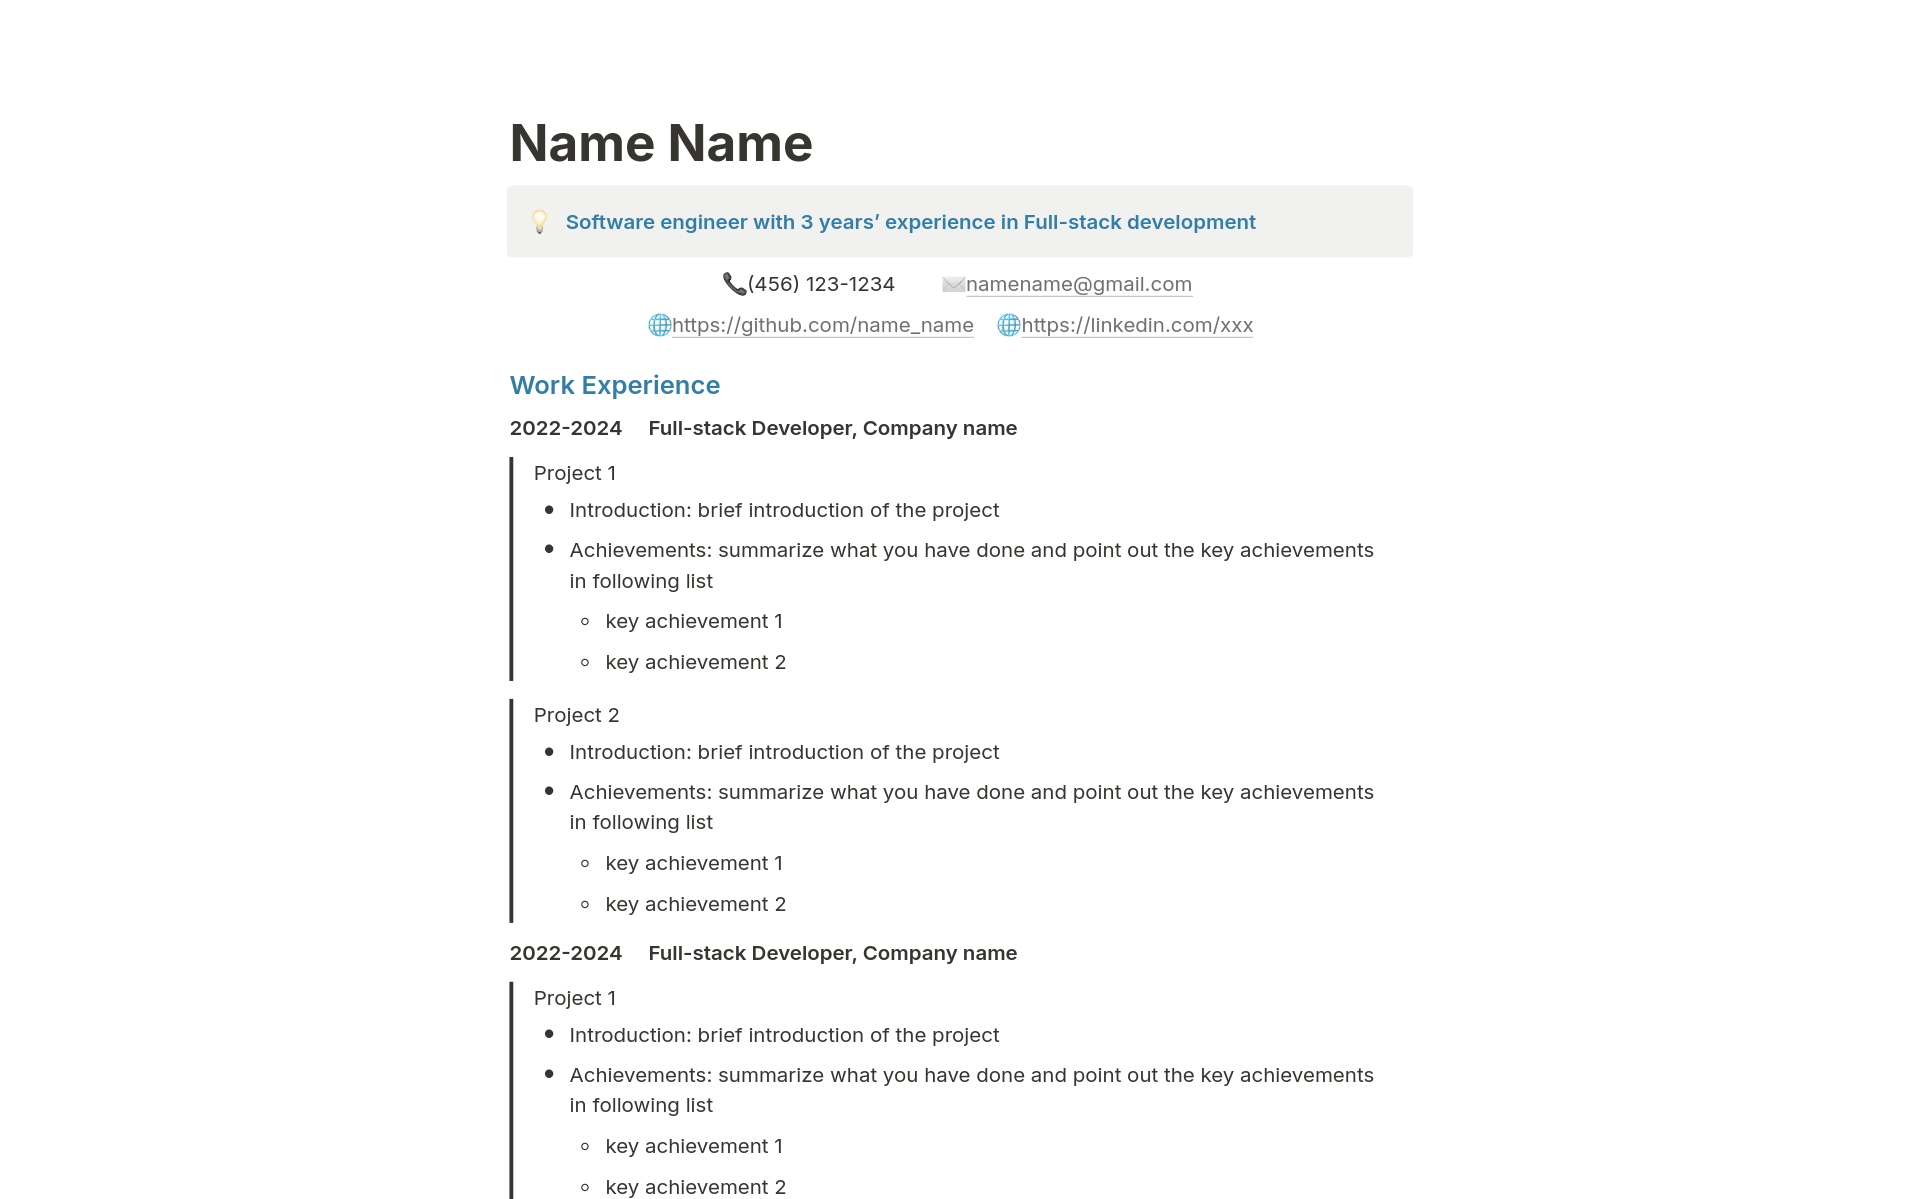 A resume/CV template for software developers